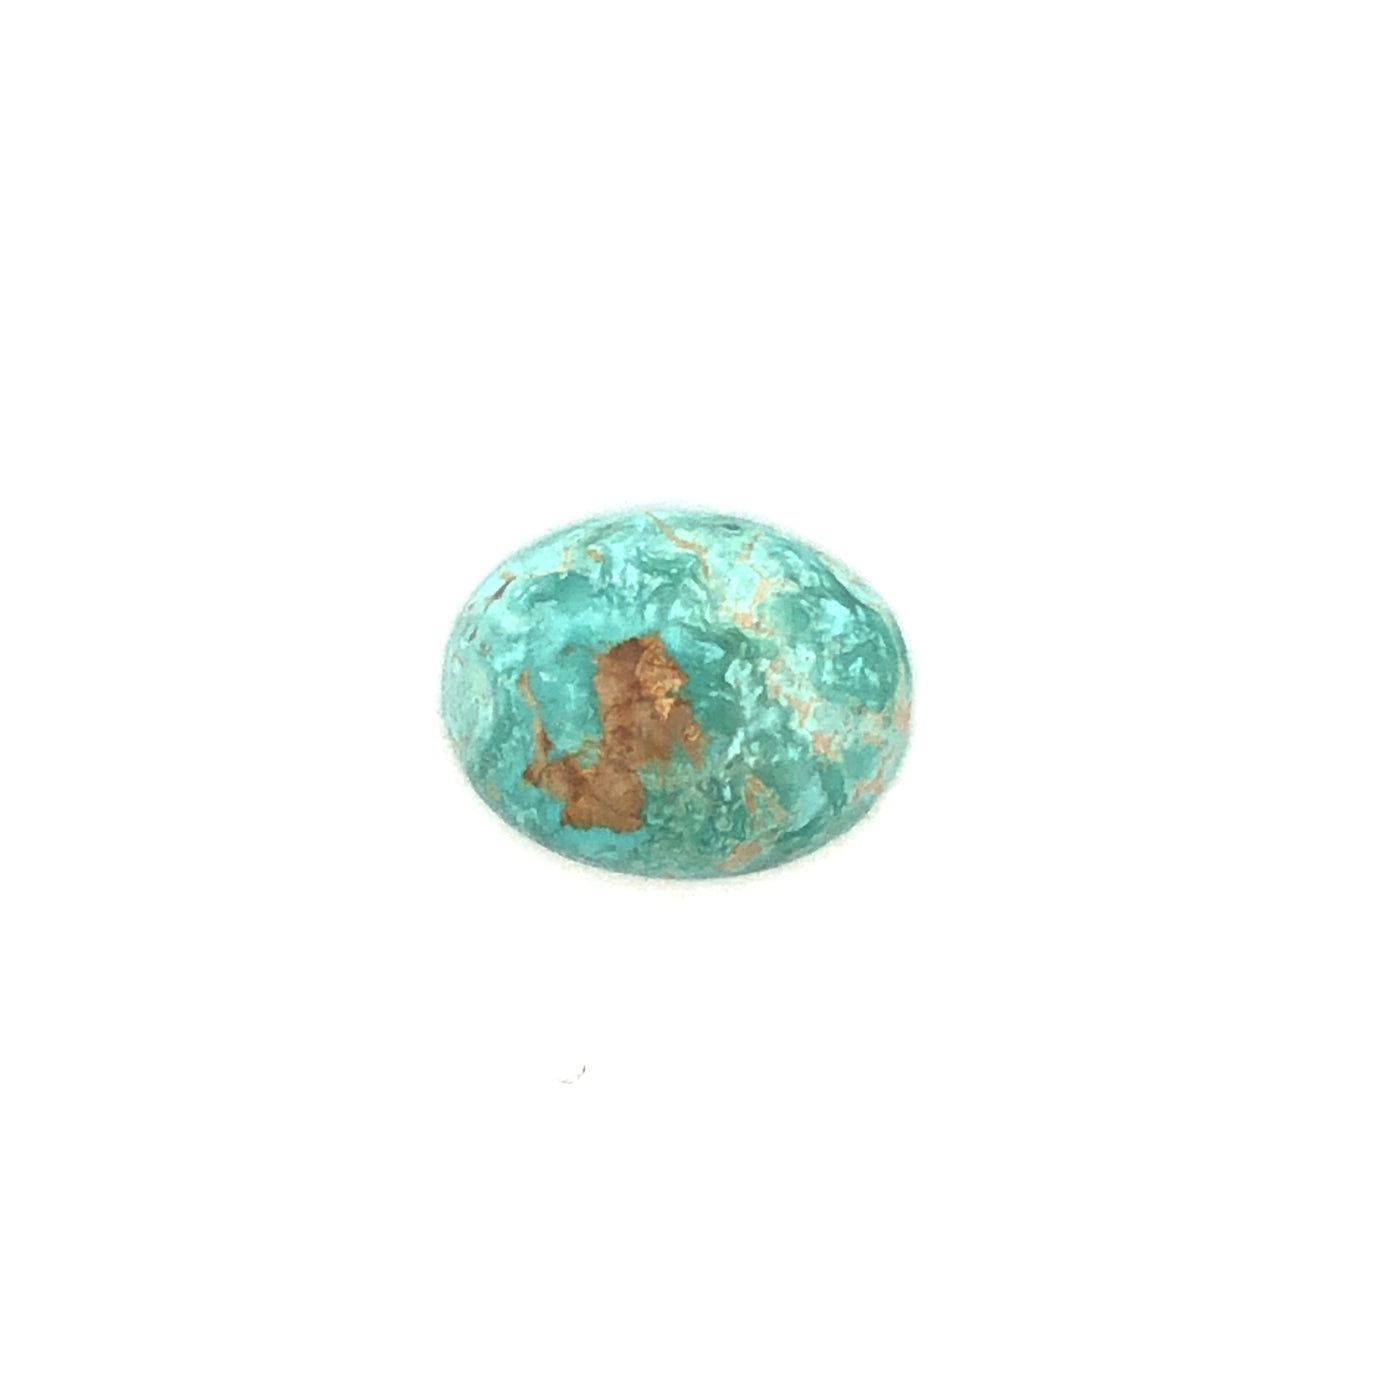 Loose Narooma Turquoise Oval Shaped 15.64Ct Blue With Some Brown